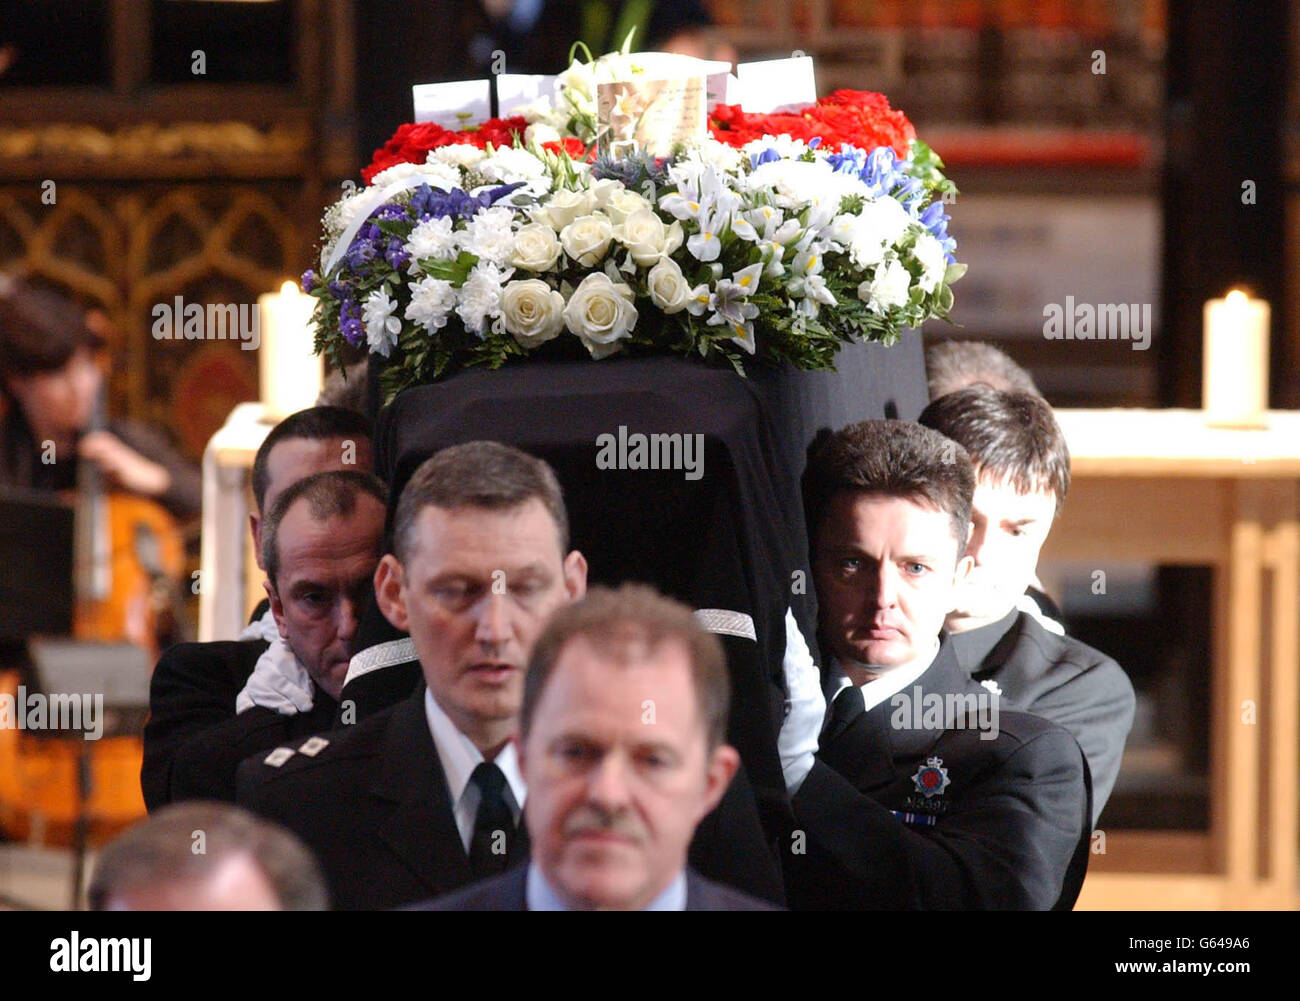 The funeral service of Detective Constable Stephen Oake at Manchester Cathedral. A thousand mourners attended the funeral of the Special Branch police officer stabbed to death in an anti-terrorism raid in Manchester last week. Stock Photo